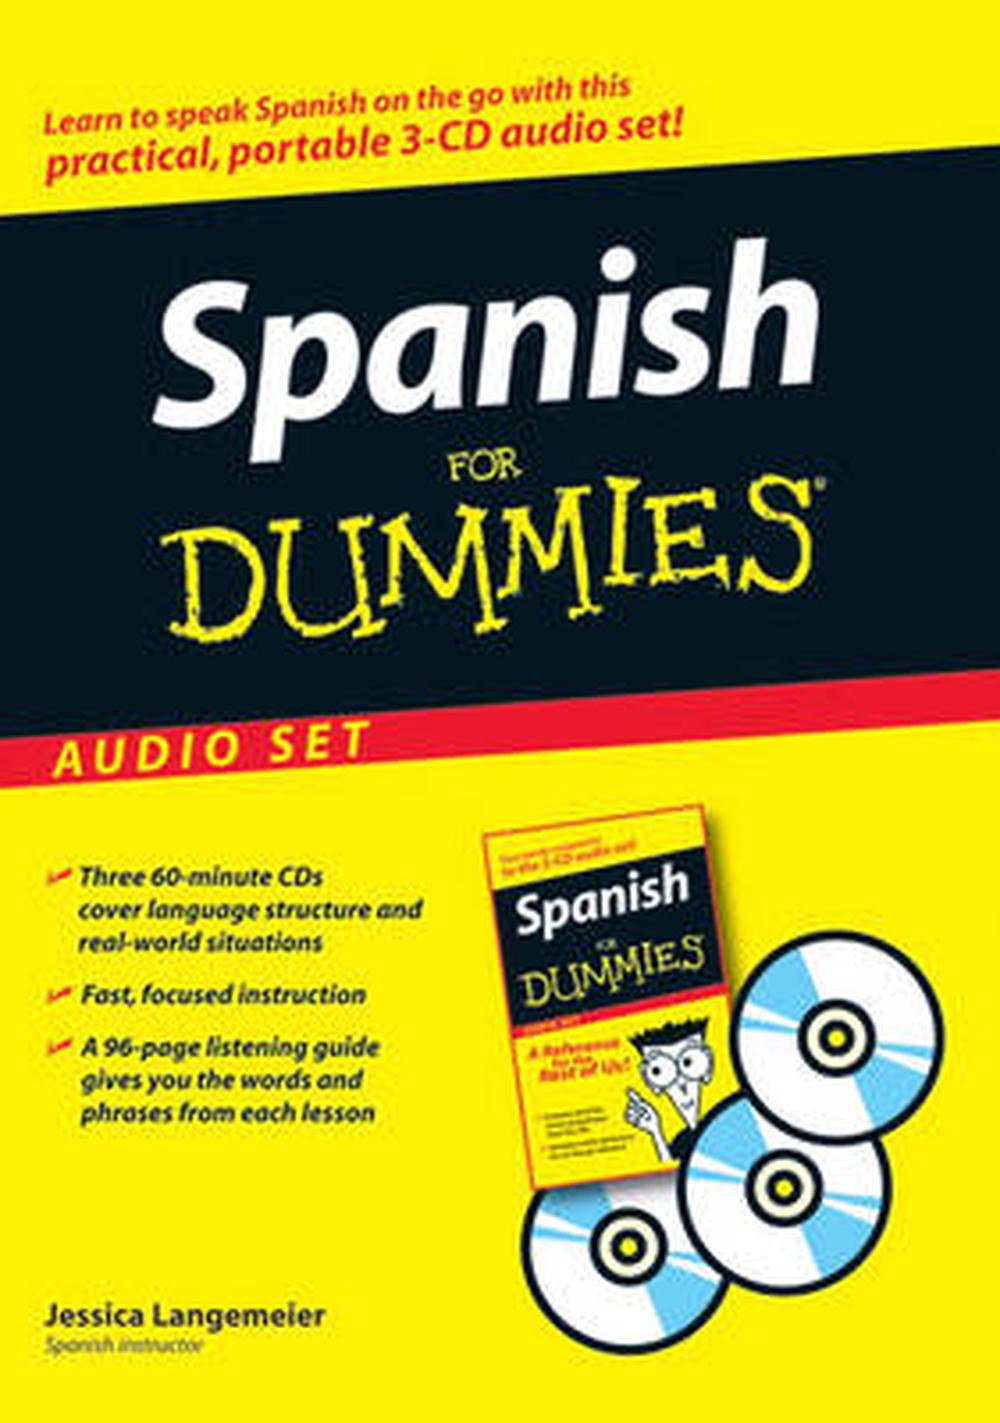 spanish-for-dummies-audio-set-with-spanish-for-dummies-reference-book